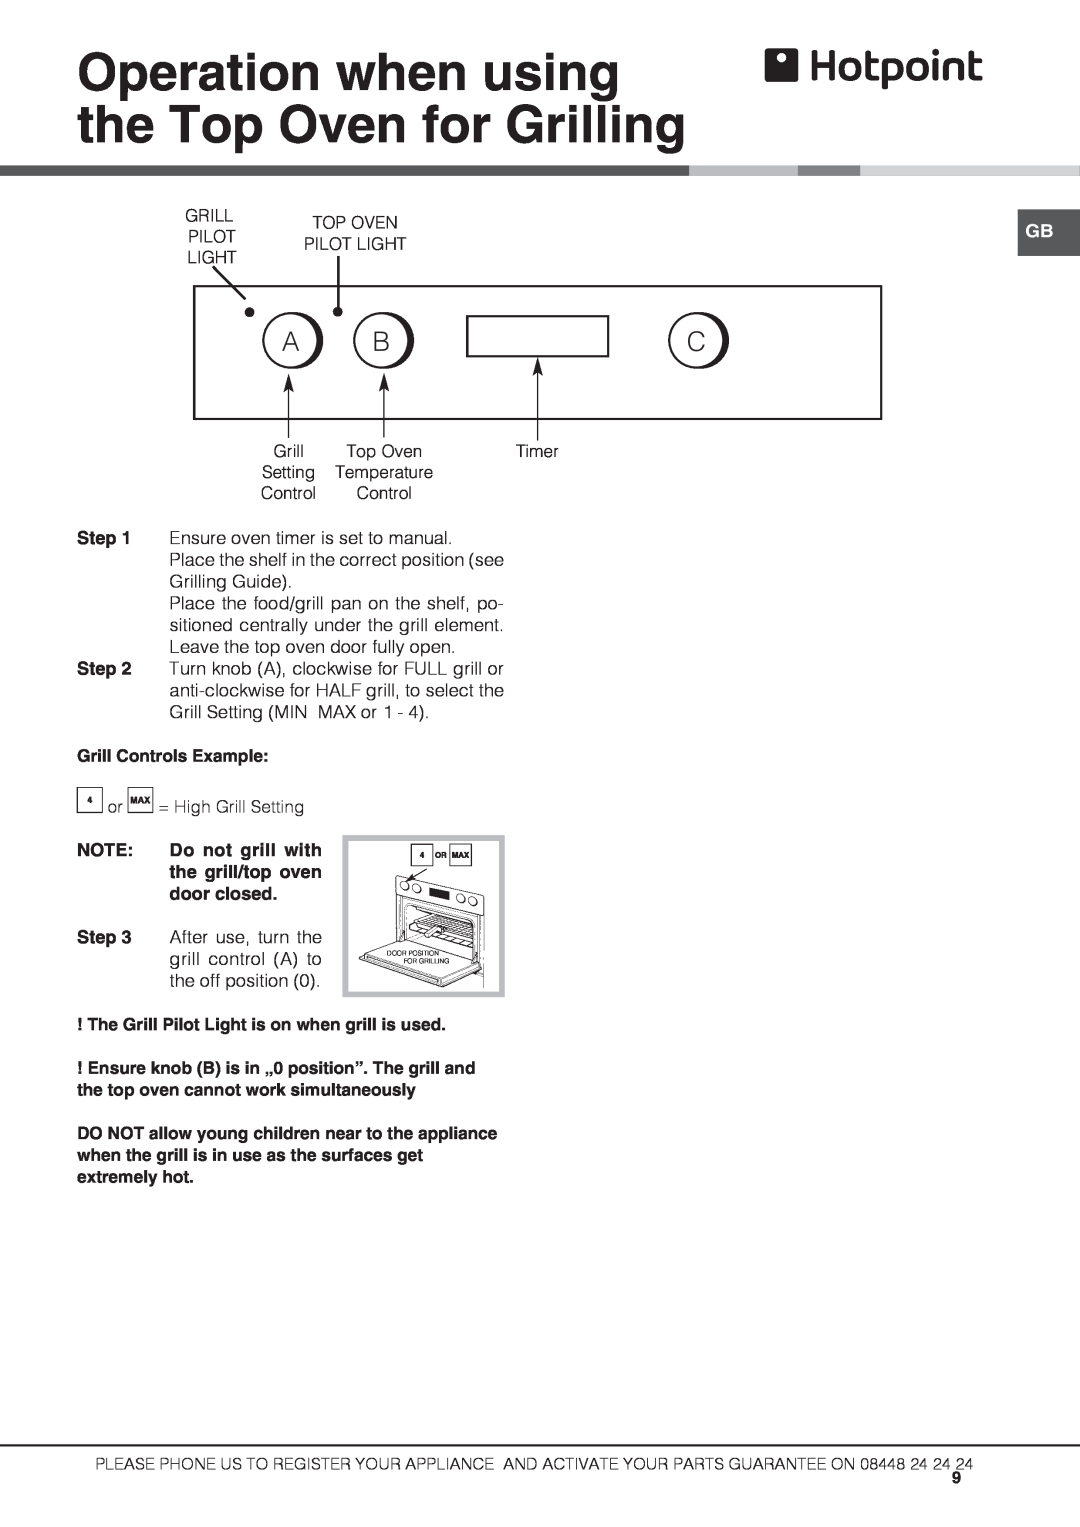 Hotpoint UBS 537 CX S manual Operation when using the Top Oven for Grilling, Grill Controls Example 